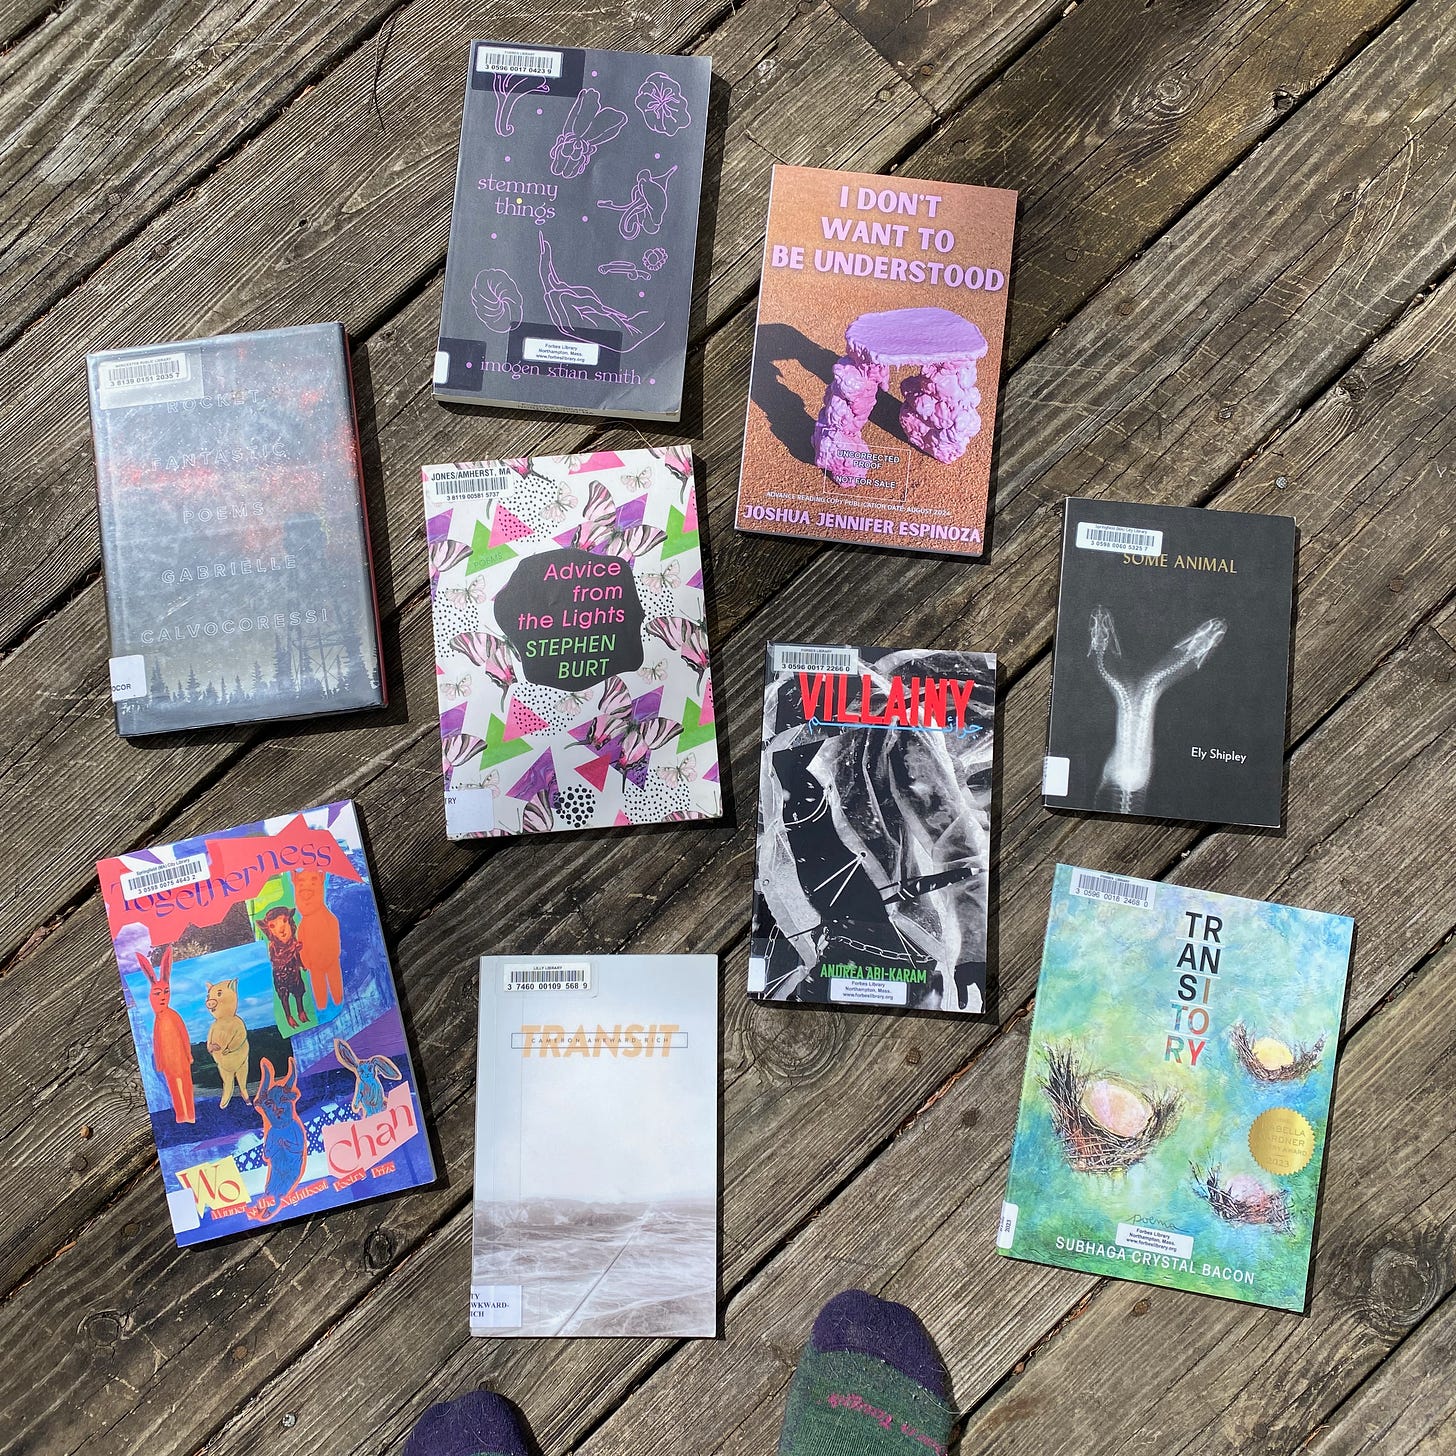 The following books spread out on a porch next to my socked feet: Stemmy Things, I Don’t Want to Be Understood, Transitory, Transit, Rocket Fantastic, Togetherness, Some Animal, Advice from the Light, Villainy.